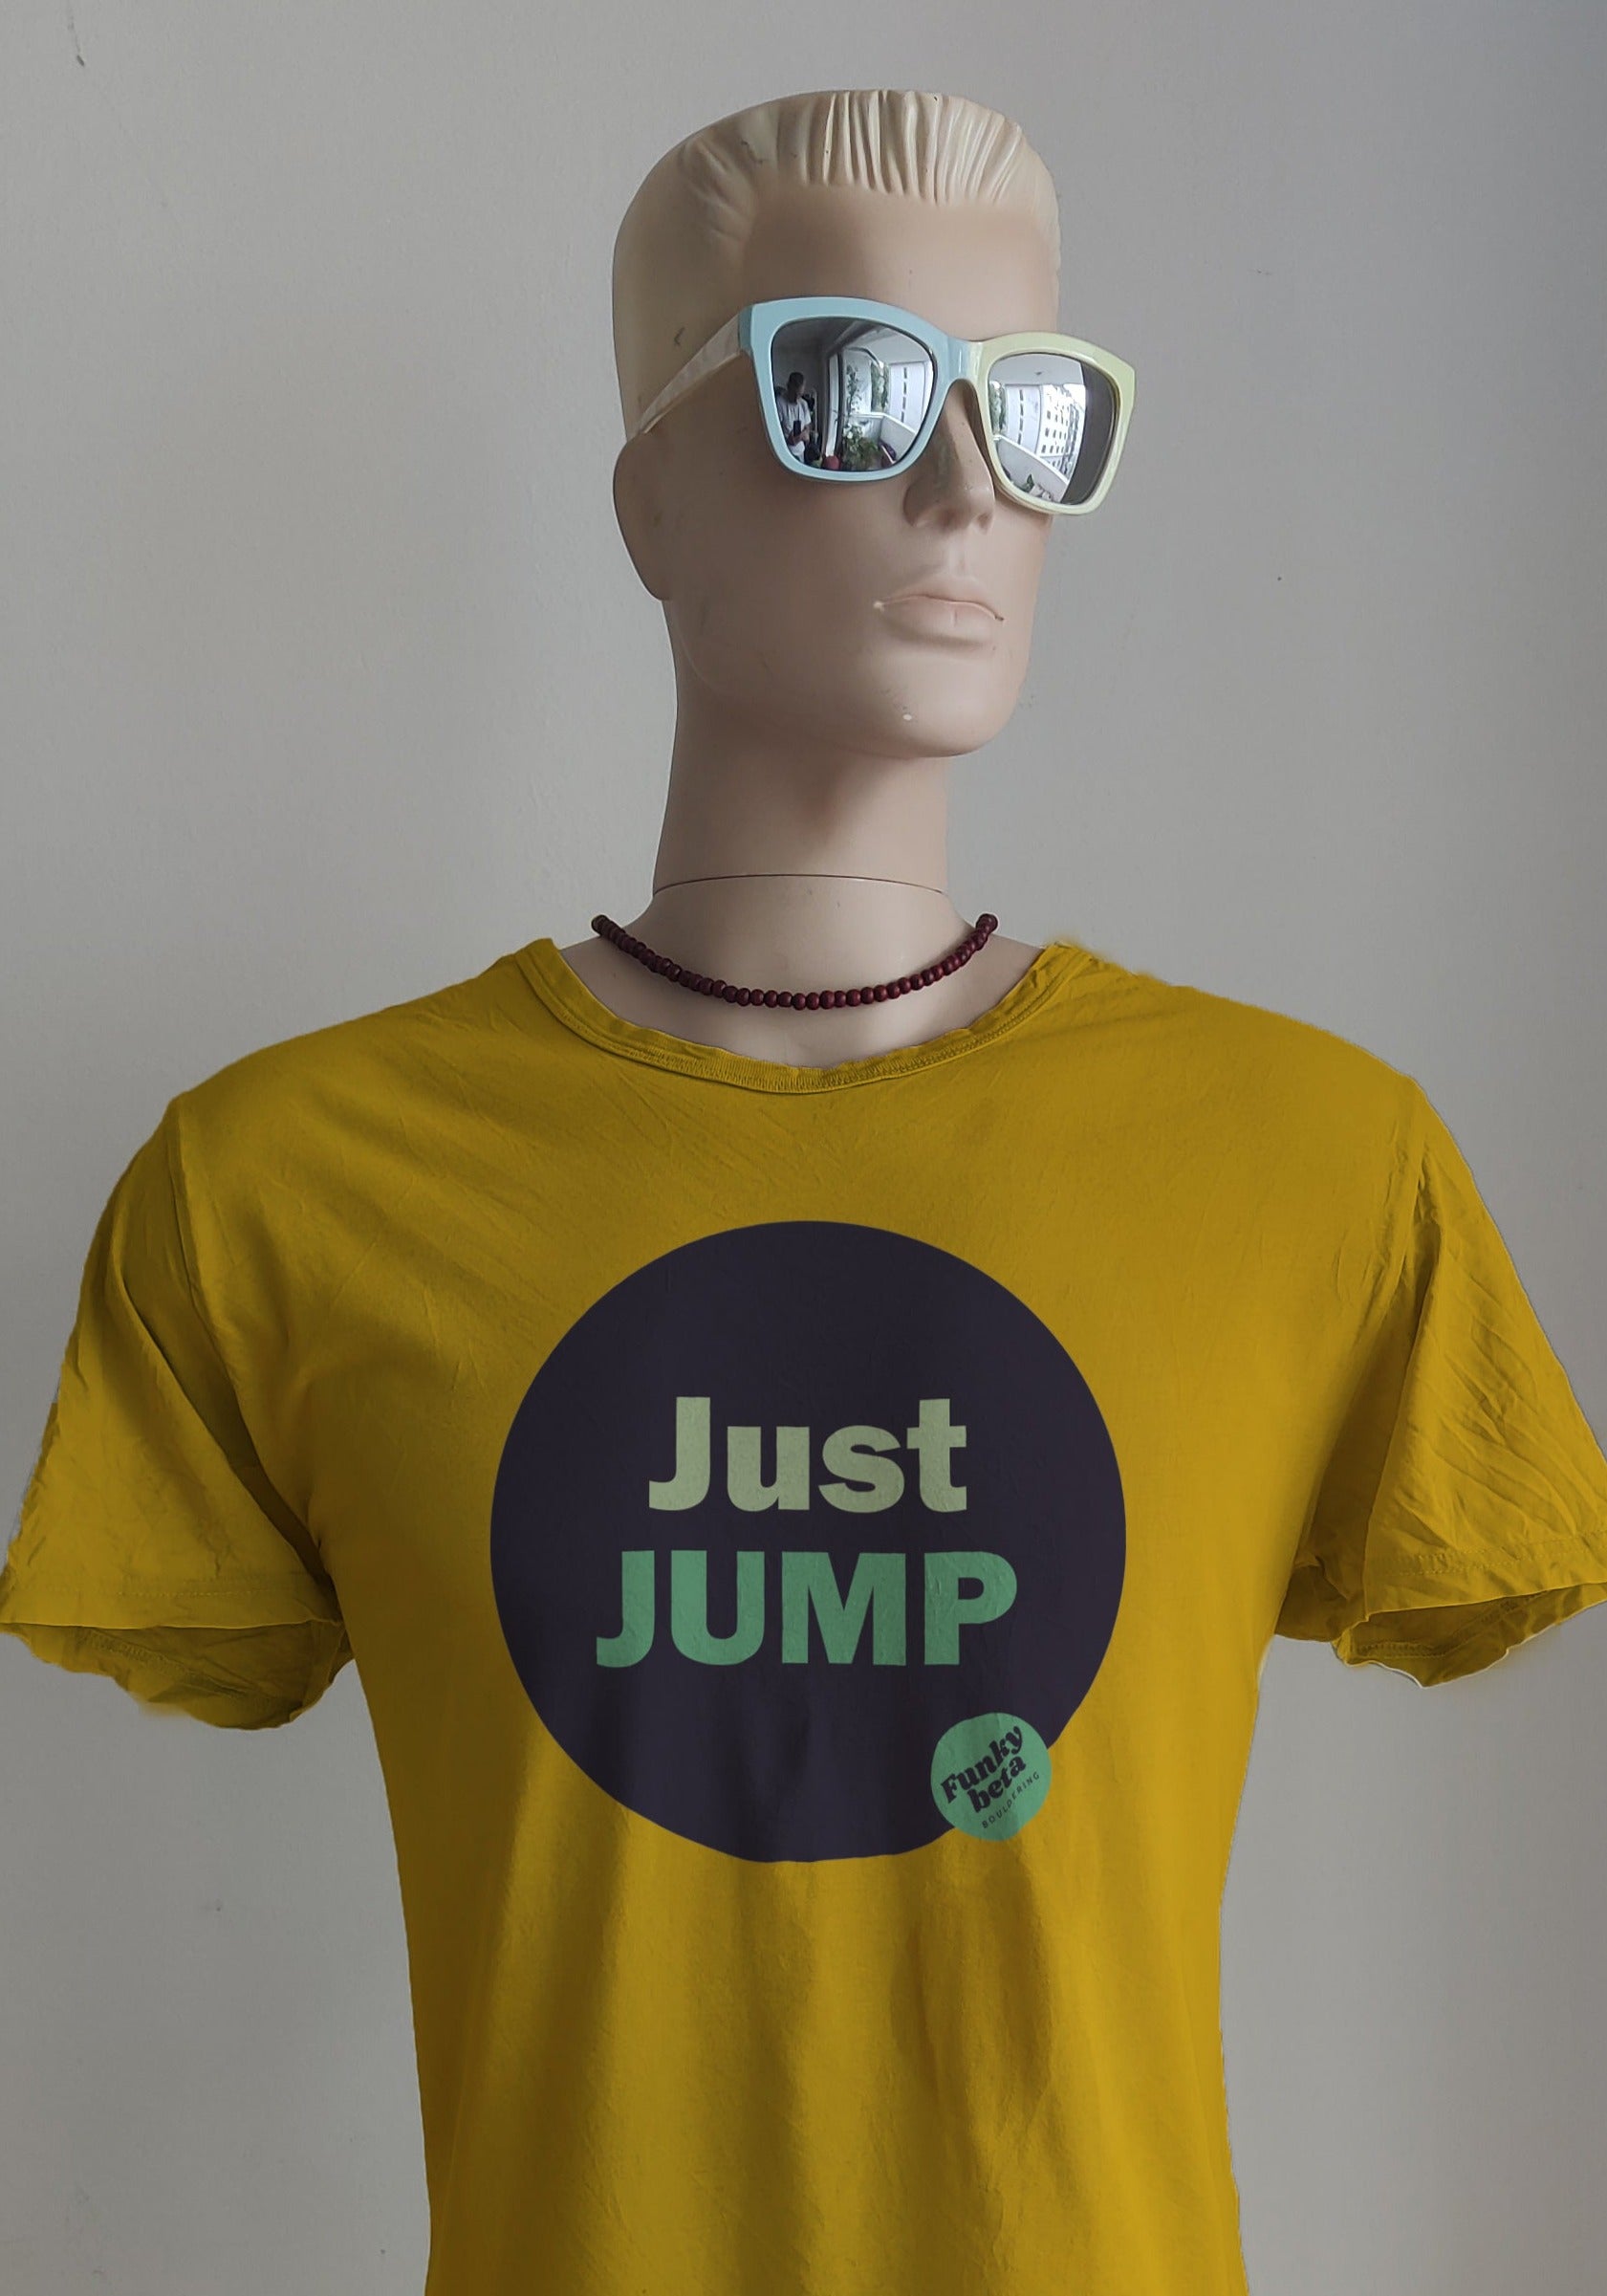 climbing T-shirt by Funkybeta bouldering - Just Jump - climbing T-shirt by Funkybeta bouldering